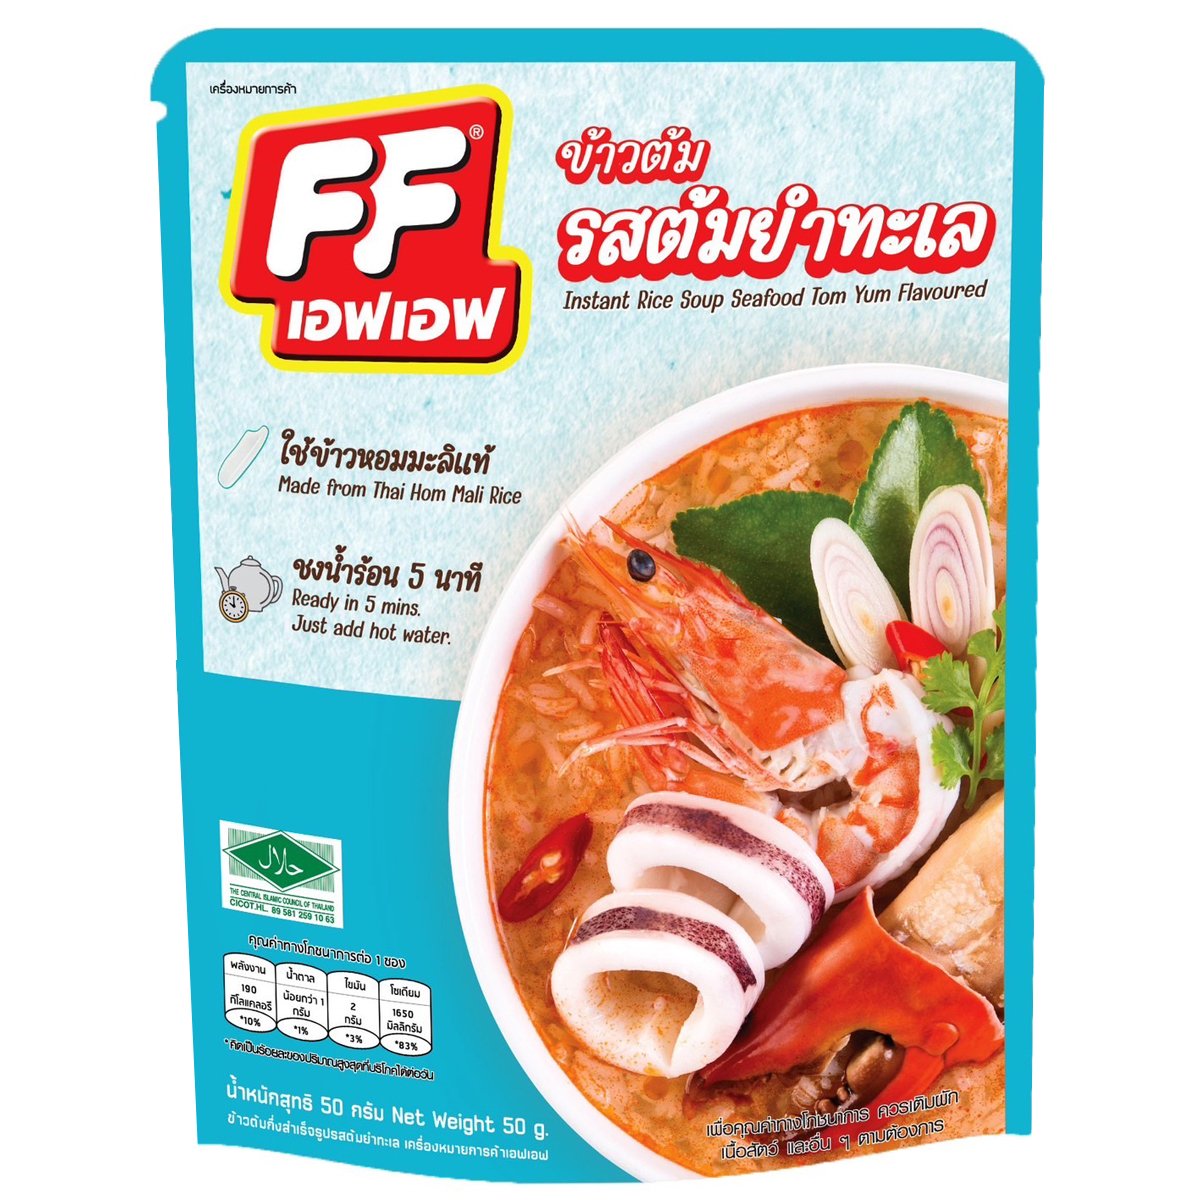 Instant Rice Soup Seafood Tom Yum Flovoured